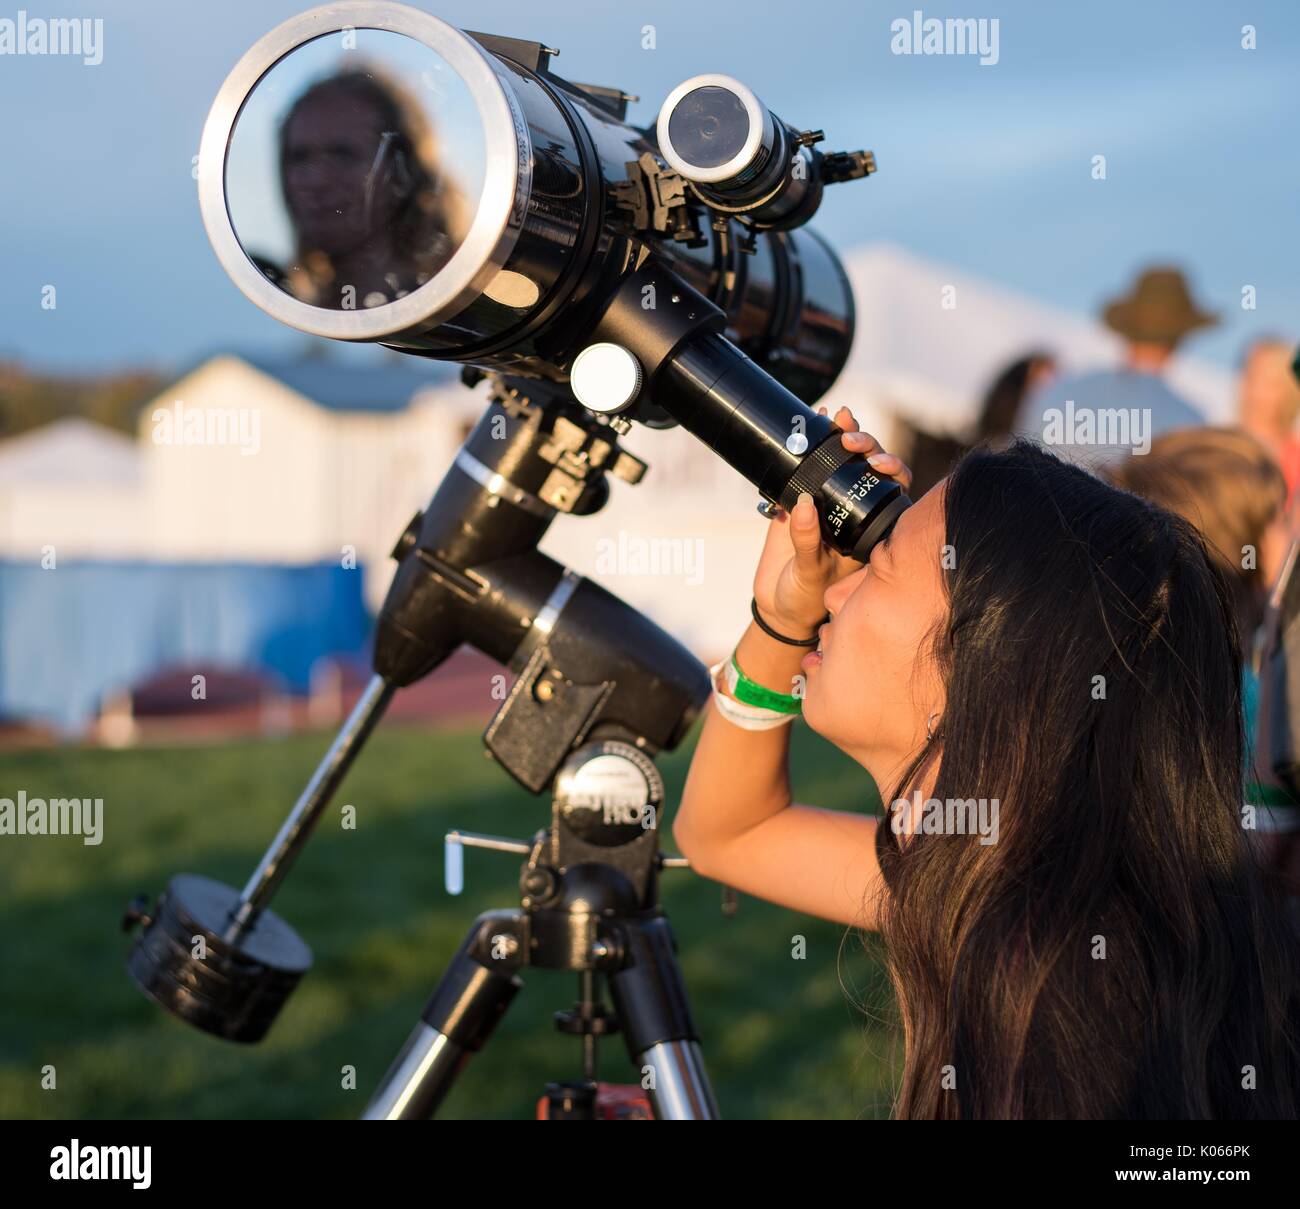 An attendee of a star party looks through a telescope at the sun the evening before the total solar eclipse August 20, 2017 in Madras, Oregon. The eclipse will be sweeping across a narrow portion of the contiguous United States from Lincoln Beach, Oregon to Charleston, South Carolina on August 21, 2017. Stock Photo